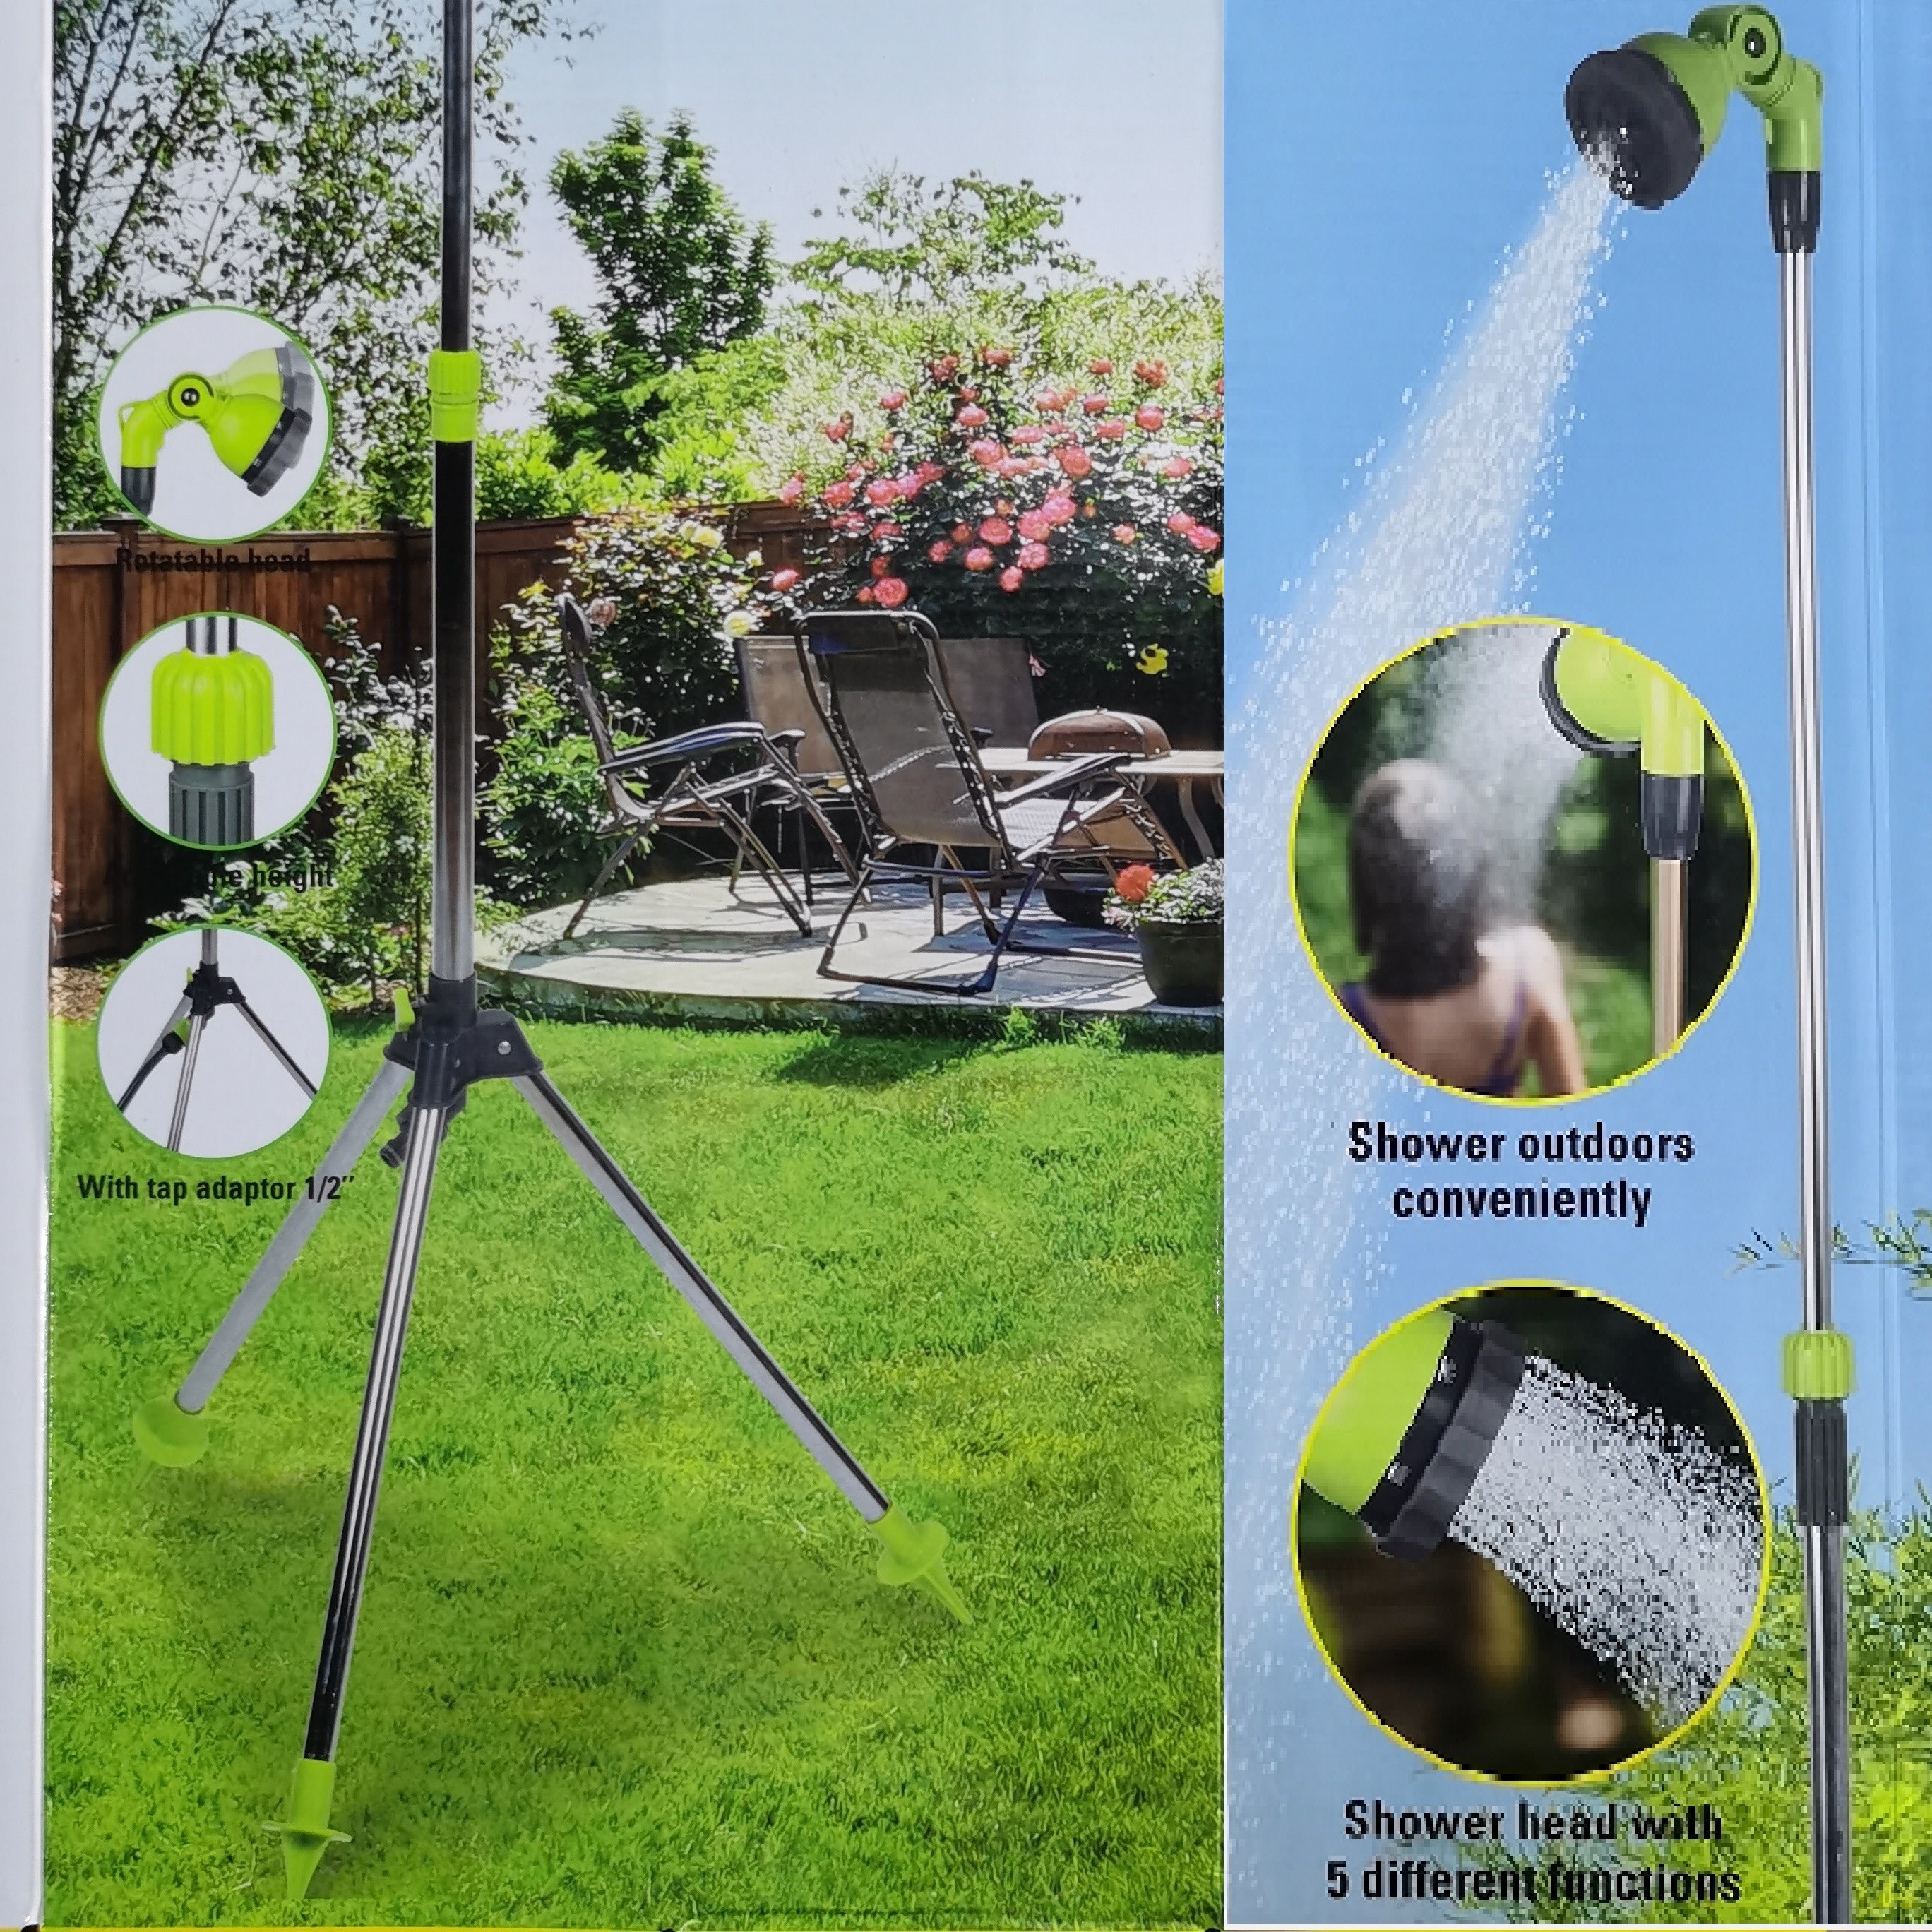 

Adjustable Height Outdoor Shower With Rotatable Head, 5-function Spray, Sturdy Tripod Base – Plastic Portable Shower For Above-ground Pools, Garden, Beach, Courtyard Use – No Electricity Required